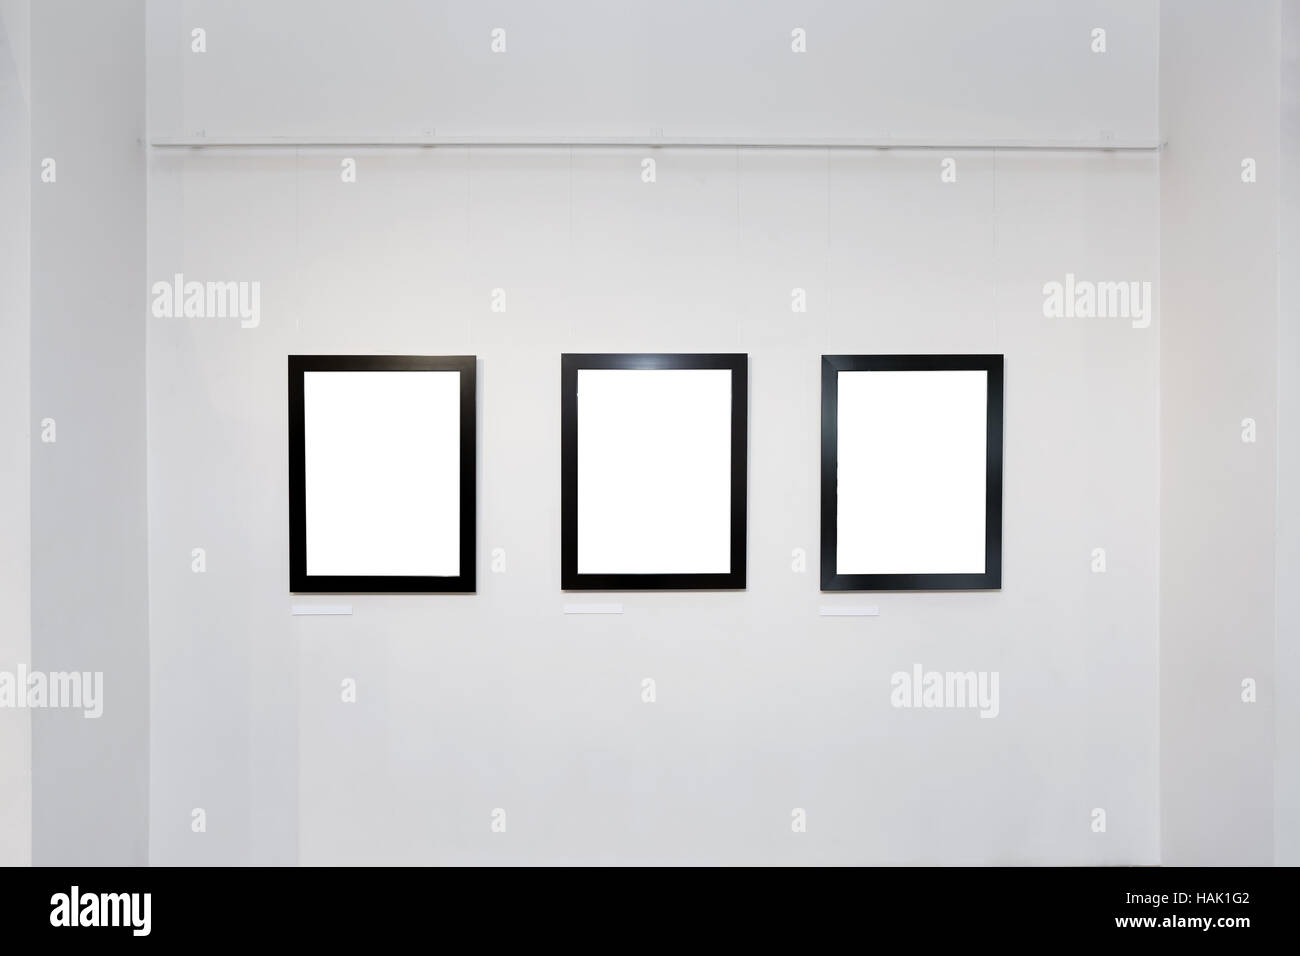 exhibition gallery interior with empty frames on wall Stock Photo